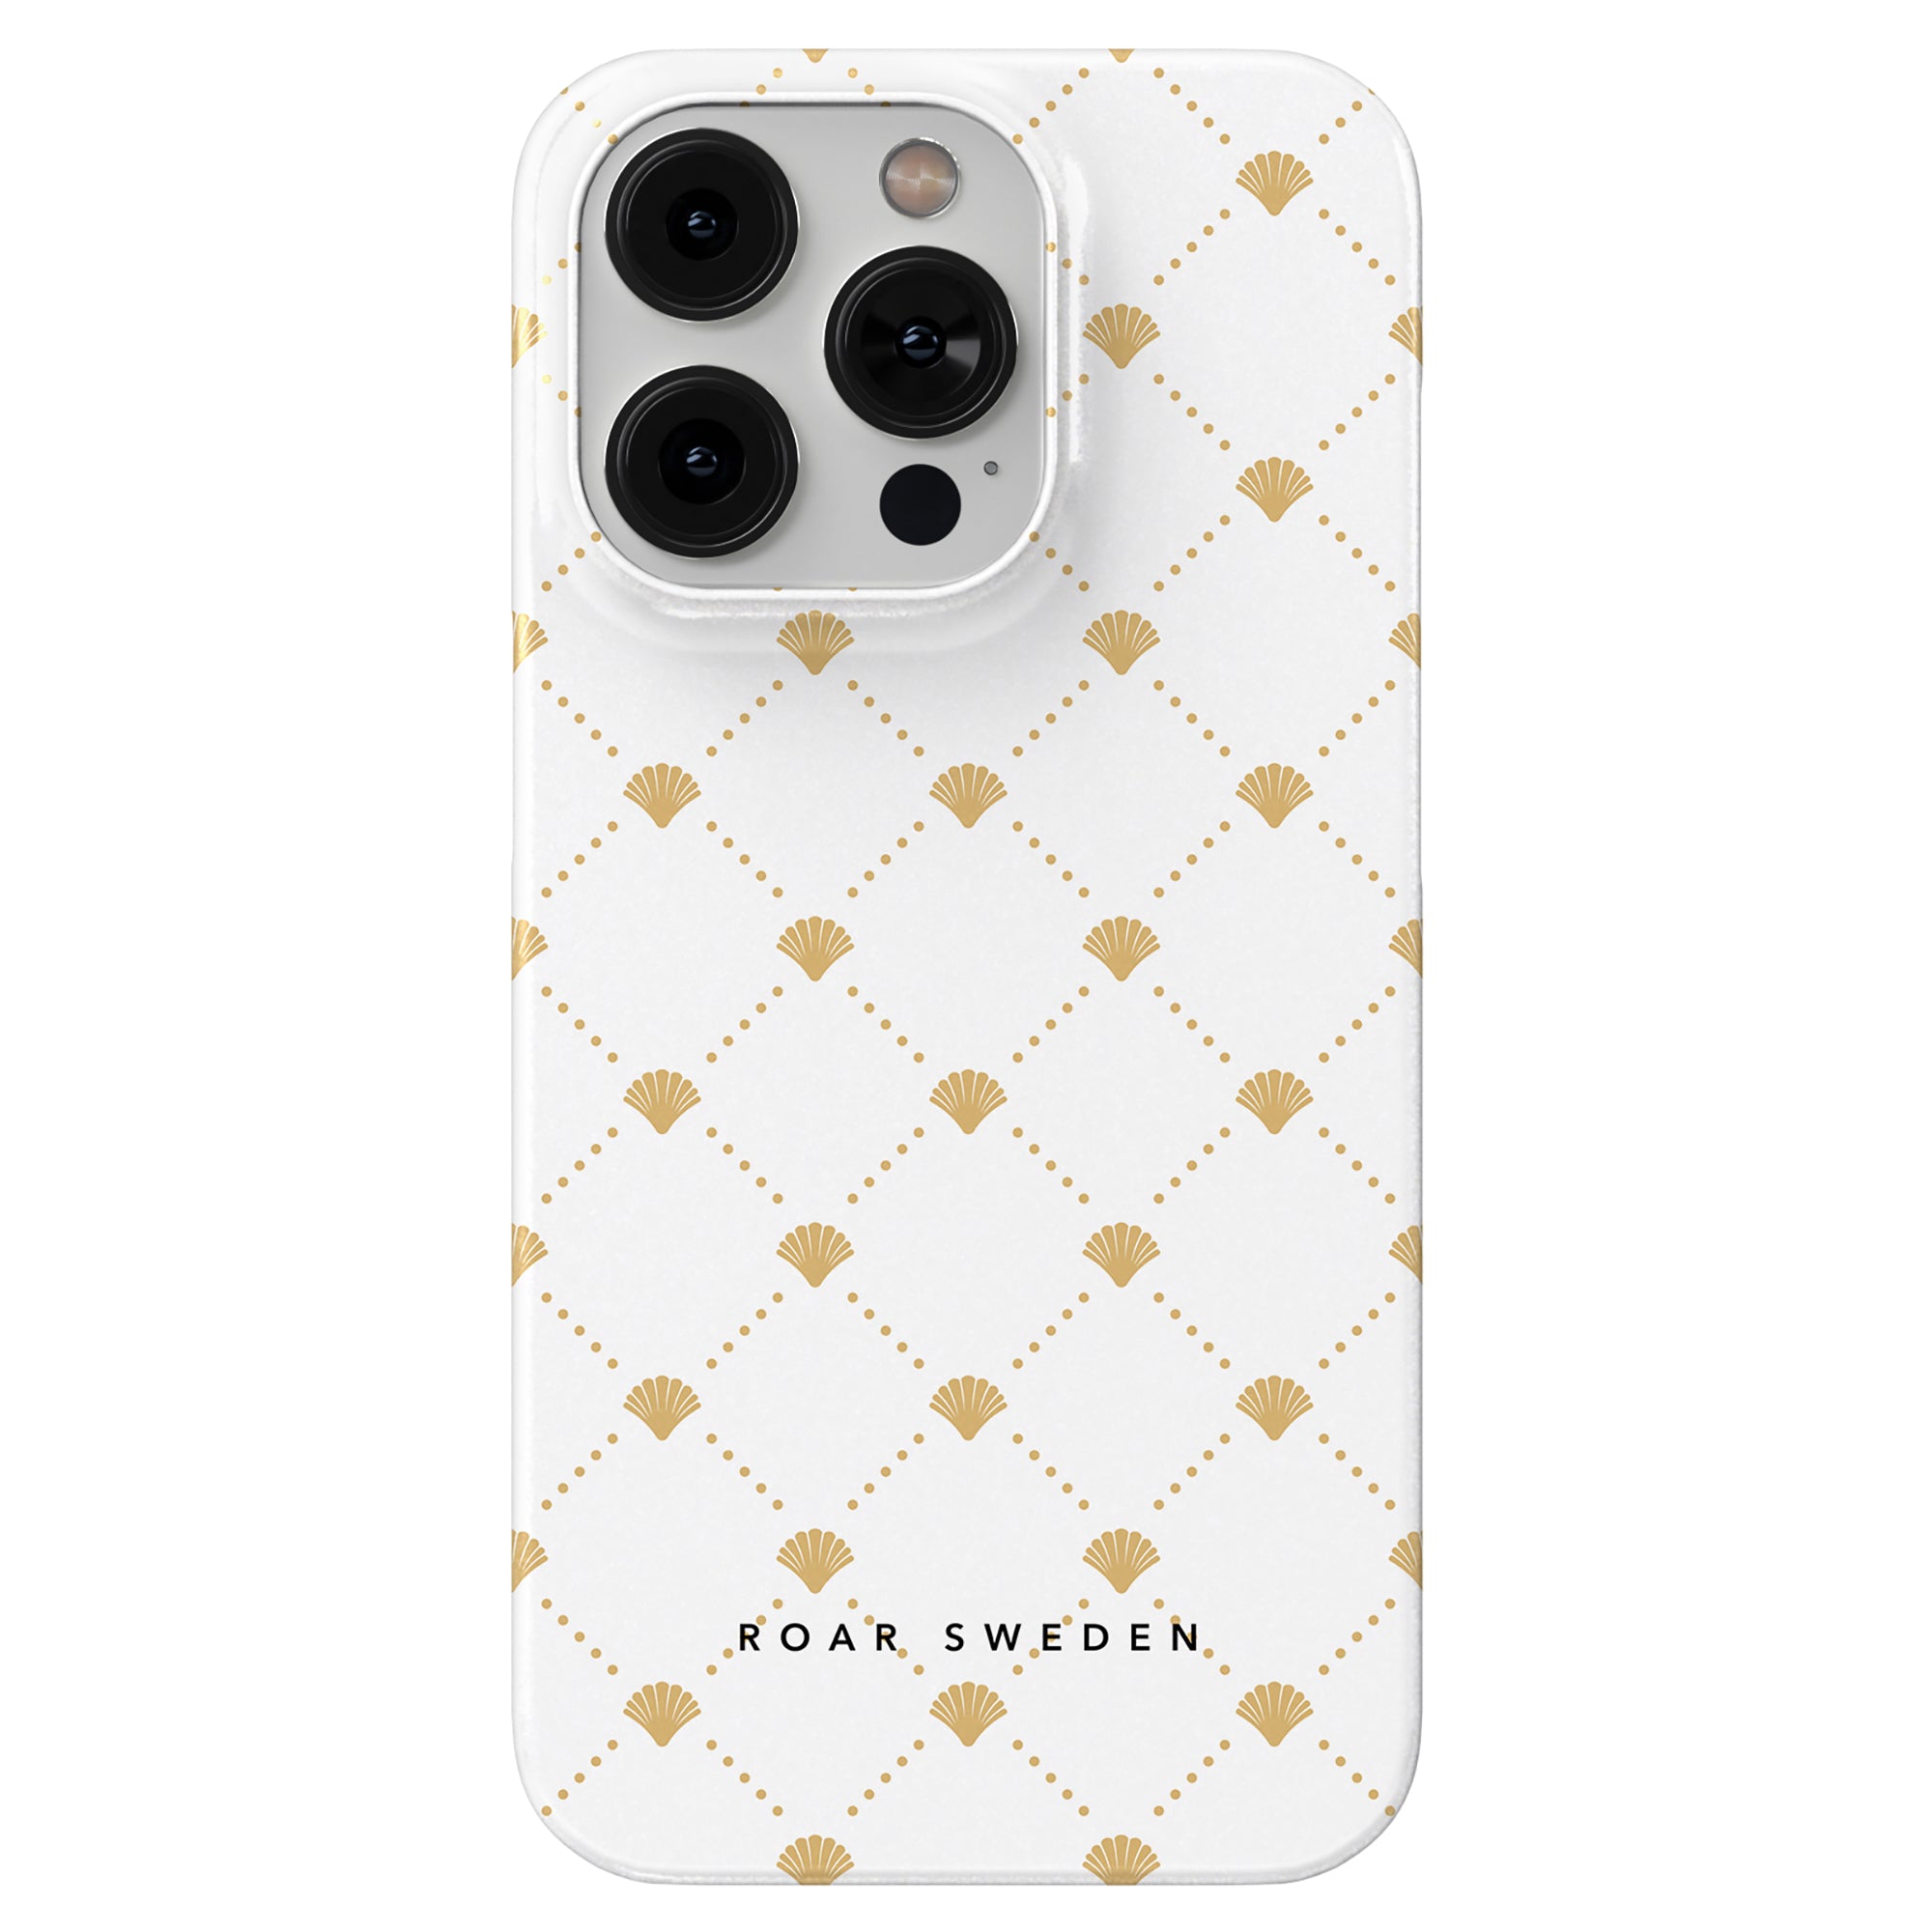 A smartphone with a Luxe Shells White - Slim case featuring a gold geometric pattern and the text "ROAR SWEDEN" at the bottom, part of the Ocean Collection.